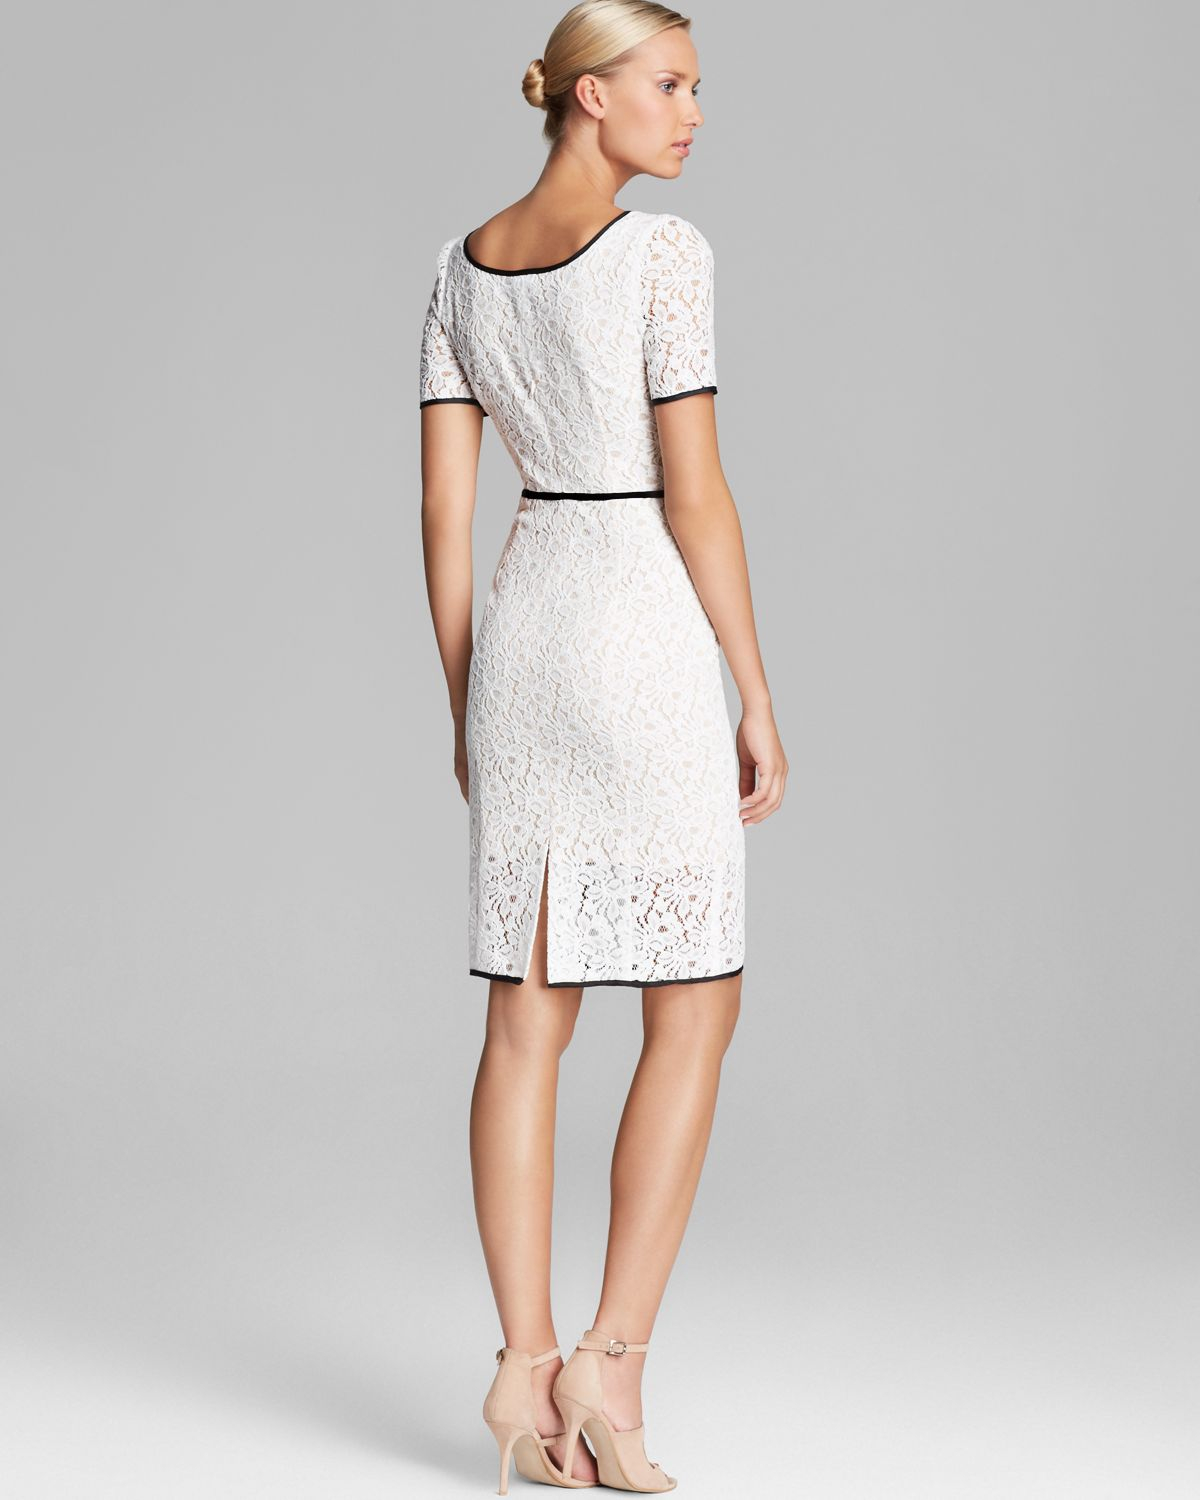 ABS By Allen Schwartz Dress Square Neck Short Sleeve Lace Sheath in Ivory  (White) - Lyst